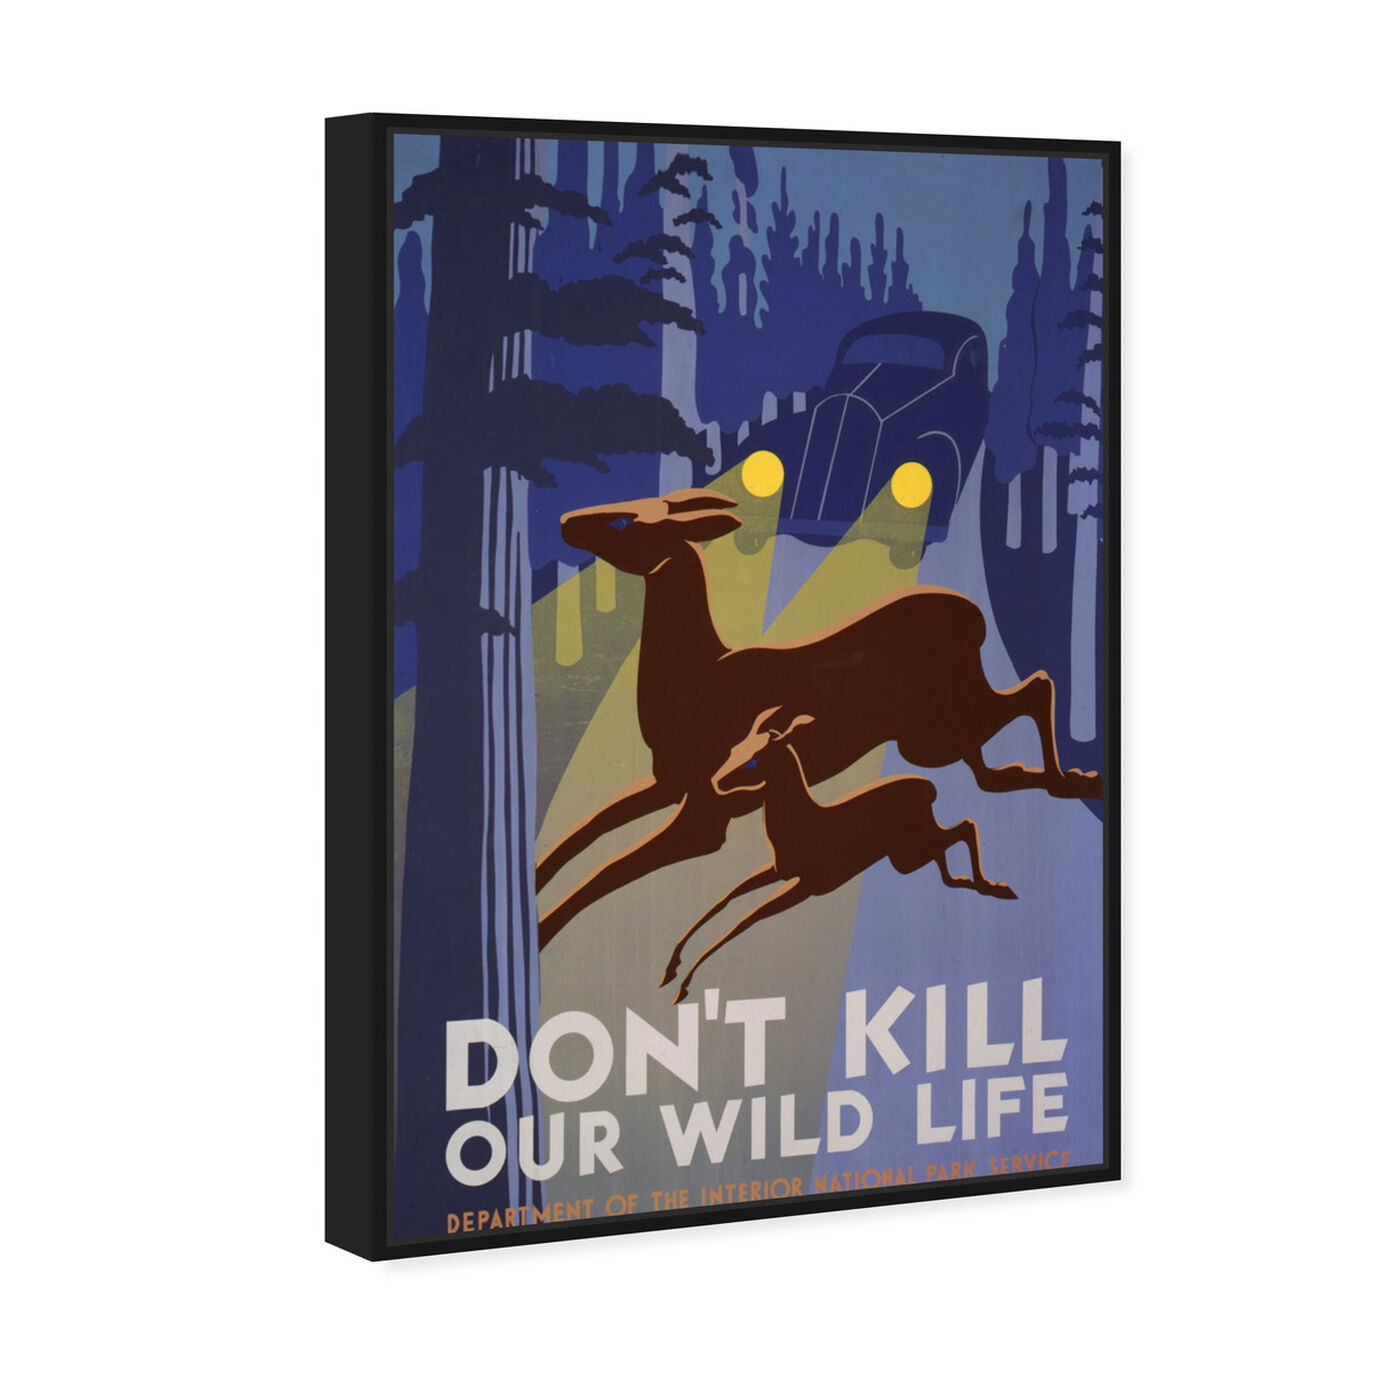 Angled view of Don't Kill Our Wild Life featuring advertising and posters art.